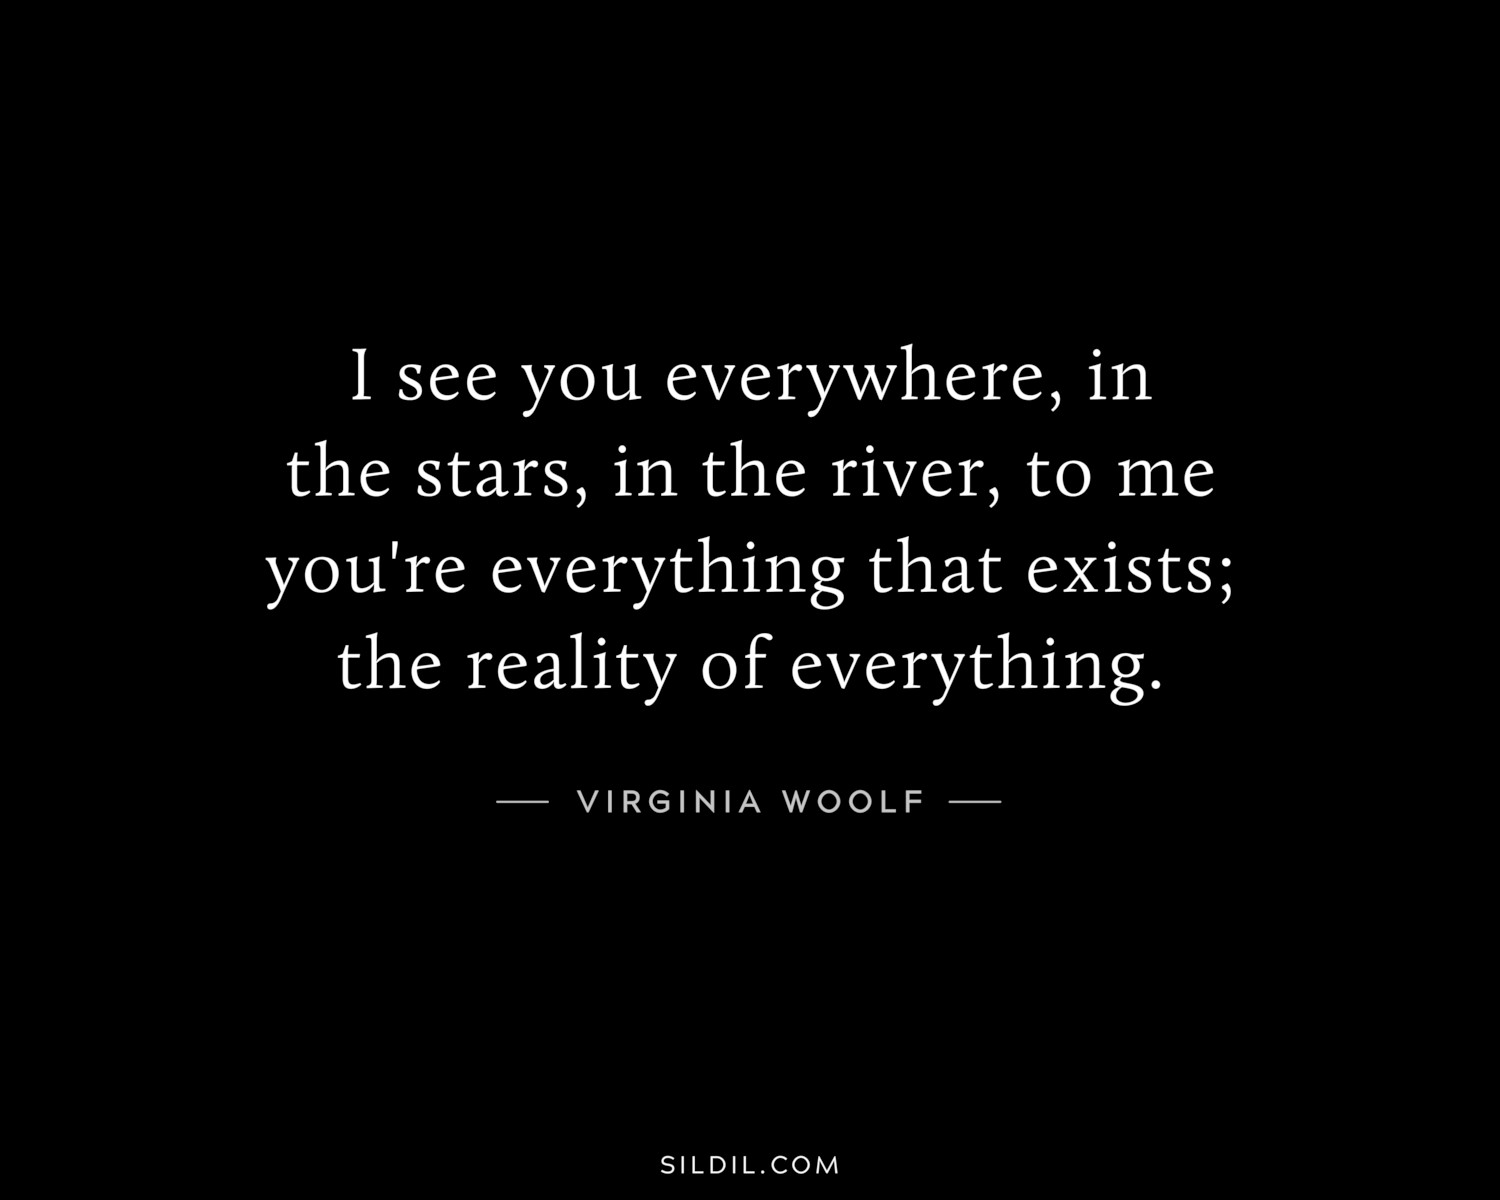 I see you everywhere, in the stars, in the river, to me you're everything that exists; the reality of everything.